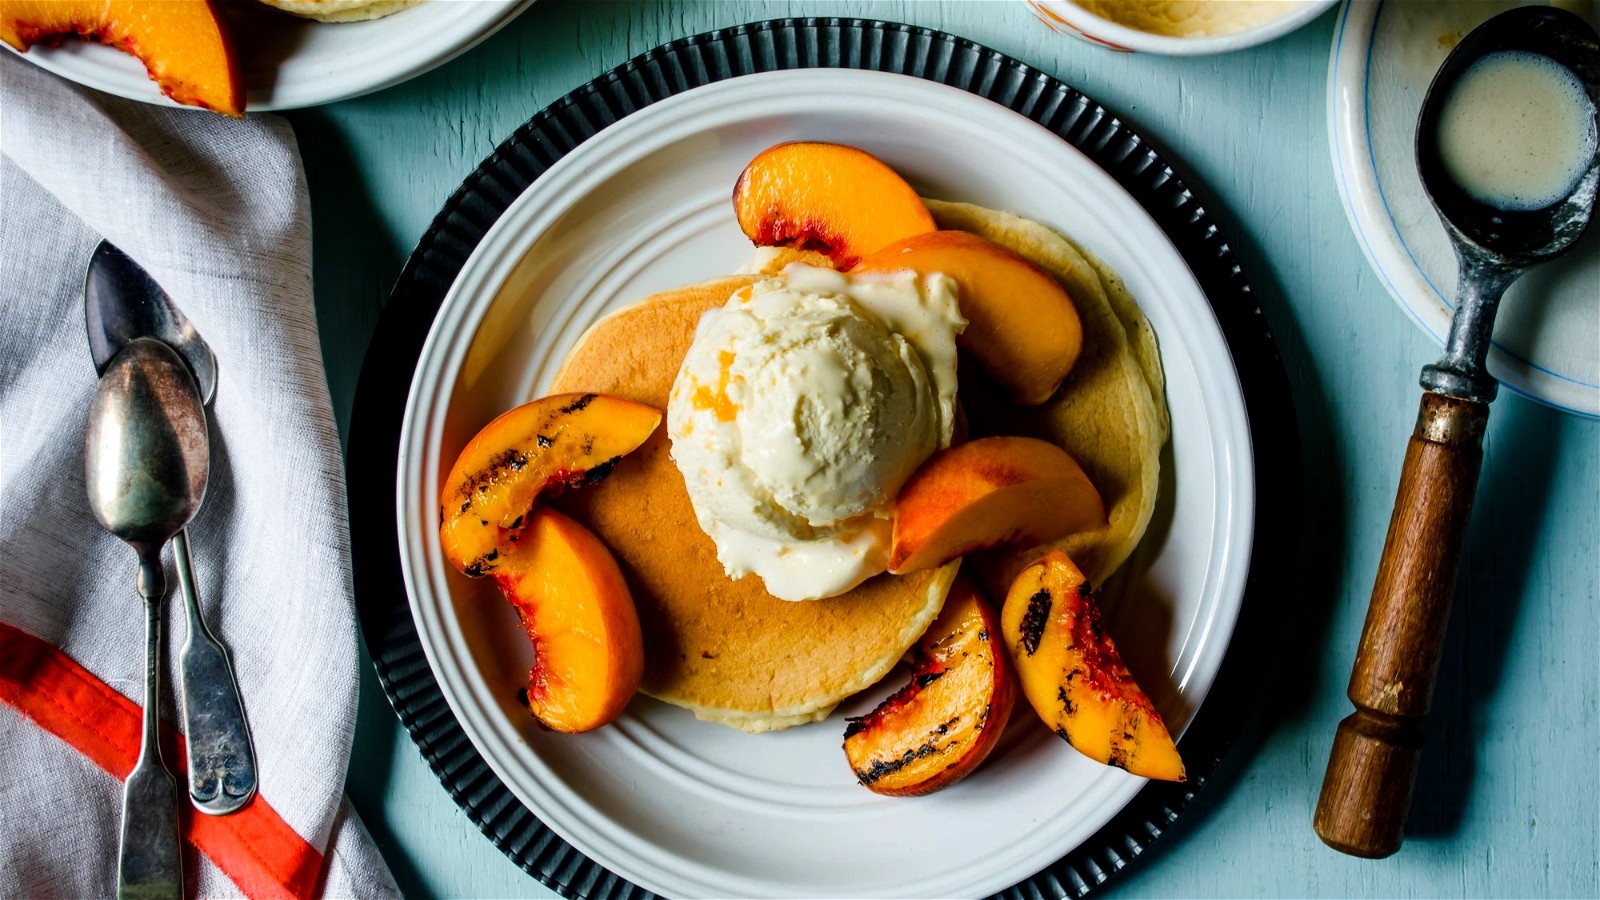 Image of Grilled Peach Pancakes